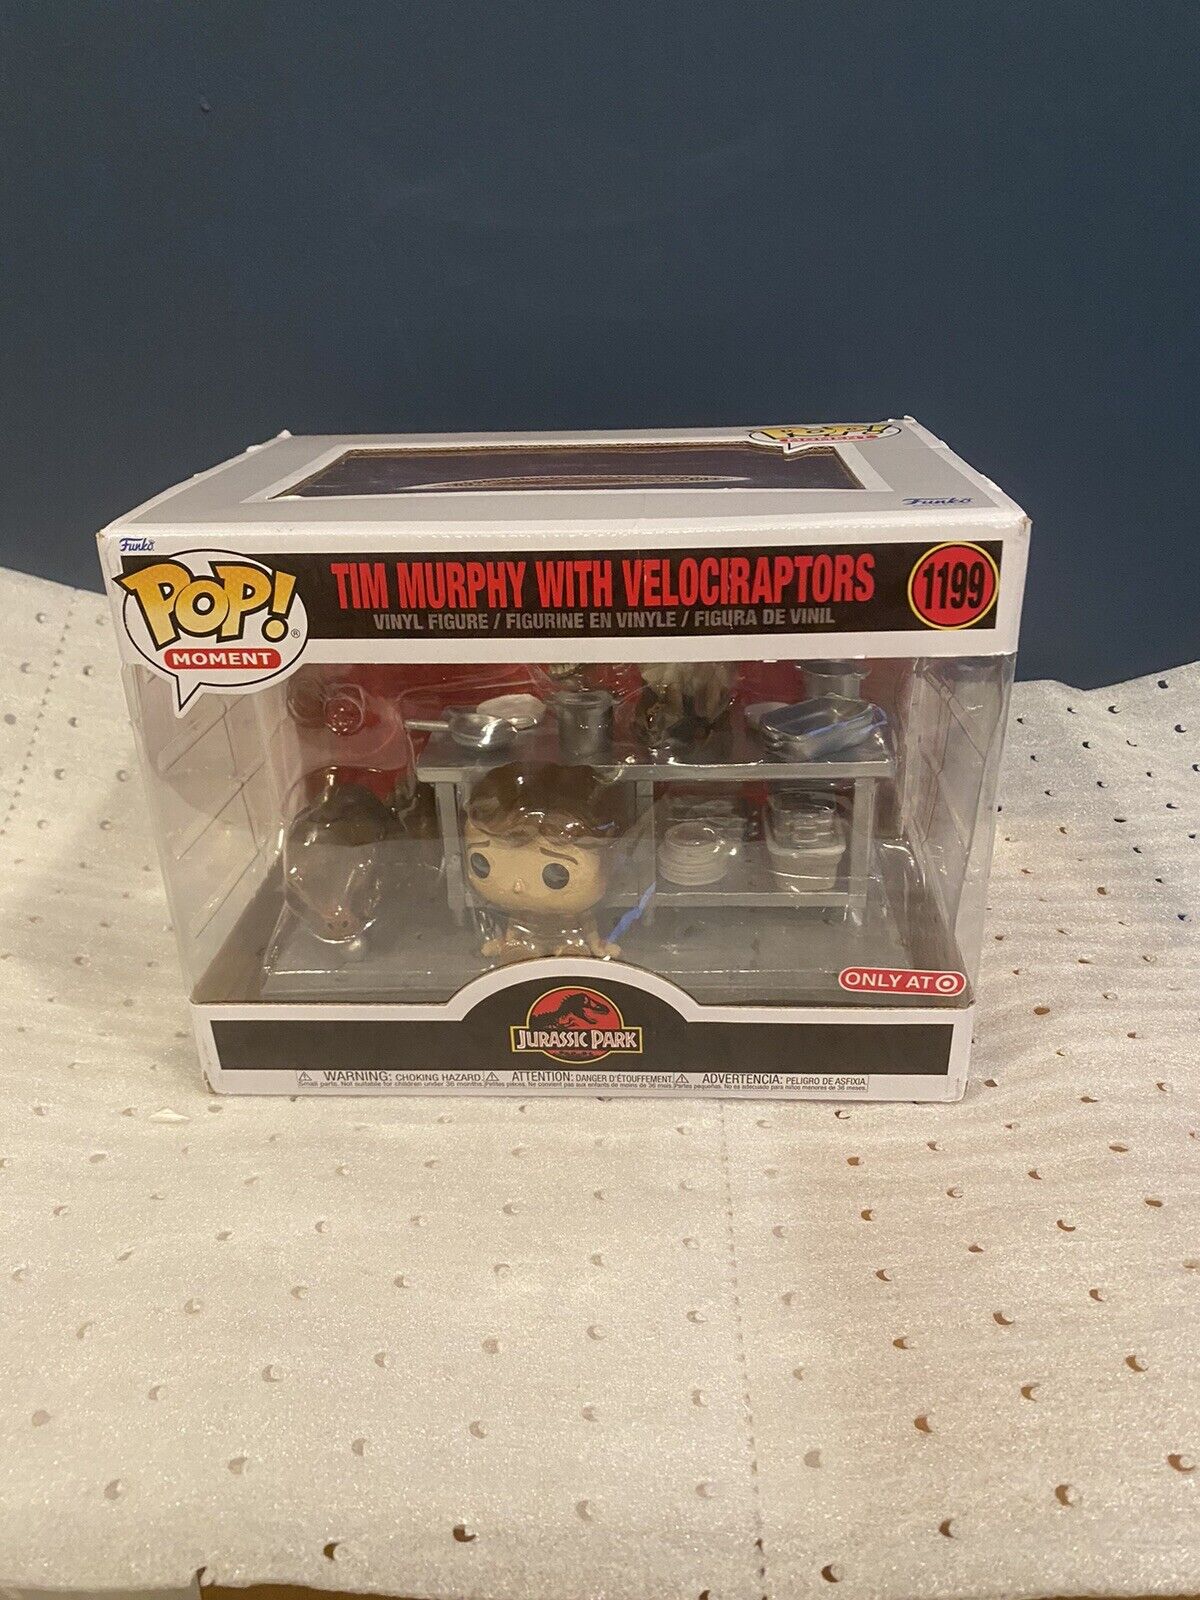 New Funko Pop Moments Jurassic Park Tim Murphy with Velociraptors Target Excl